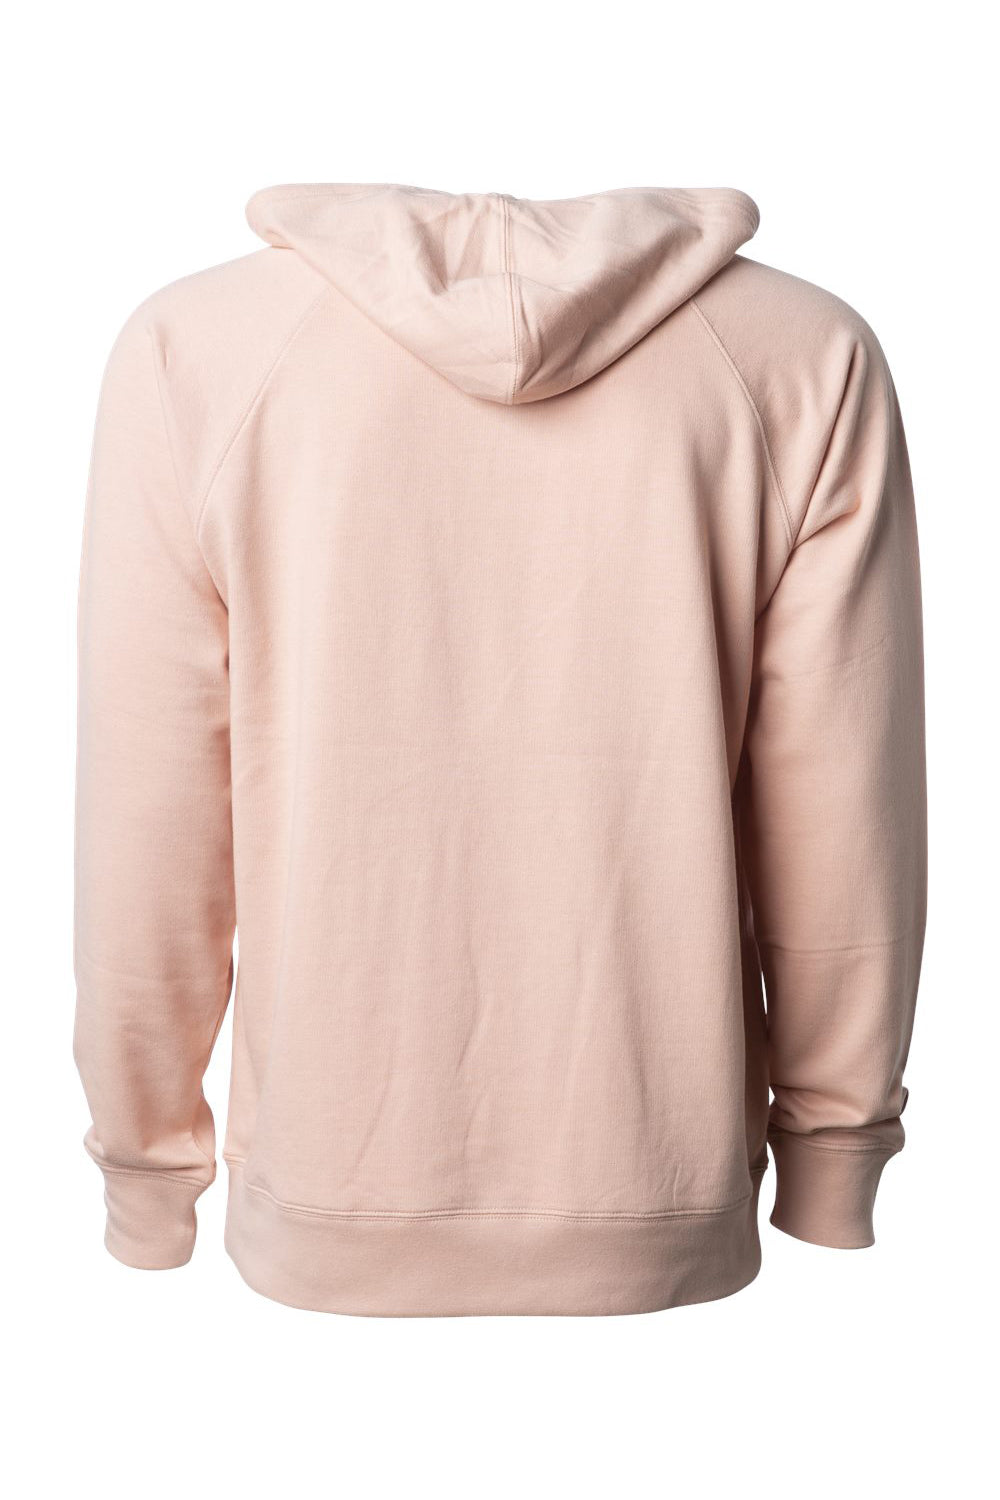 Independent Trading Co. SS1000 Mens Icon Loopback Terry Hooded Sweatshirt Hoodie Rose Pink Flat Back